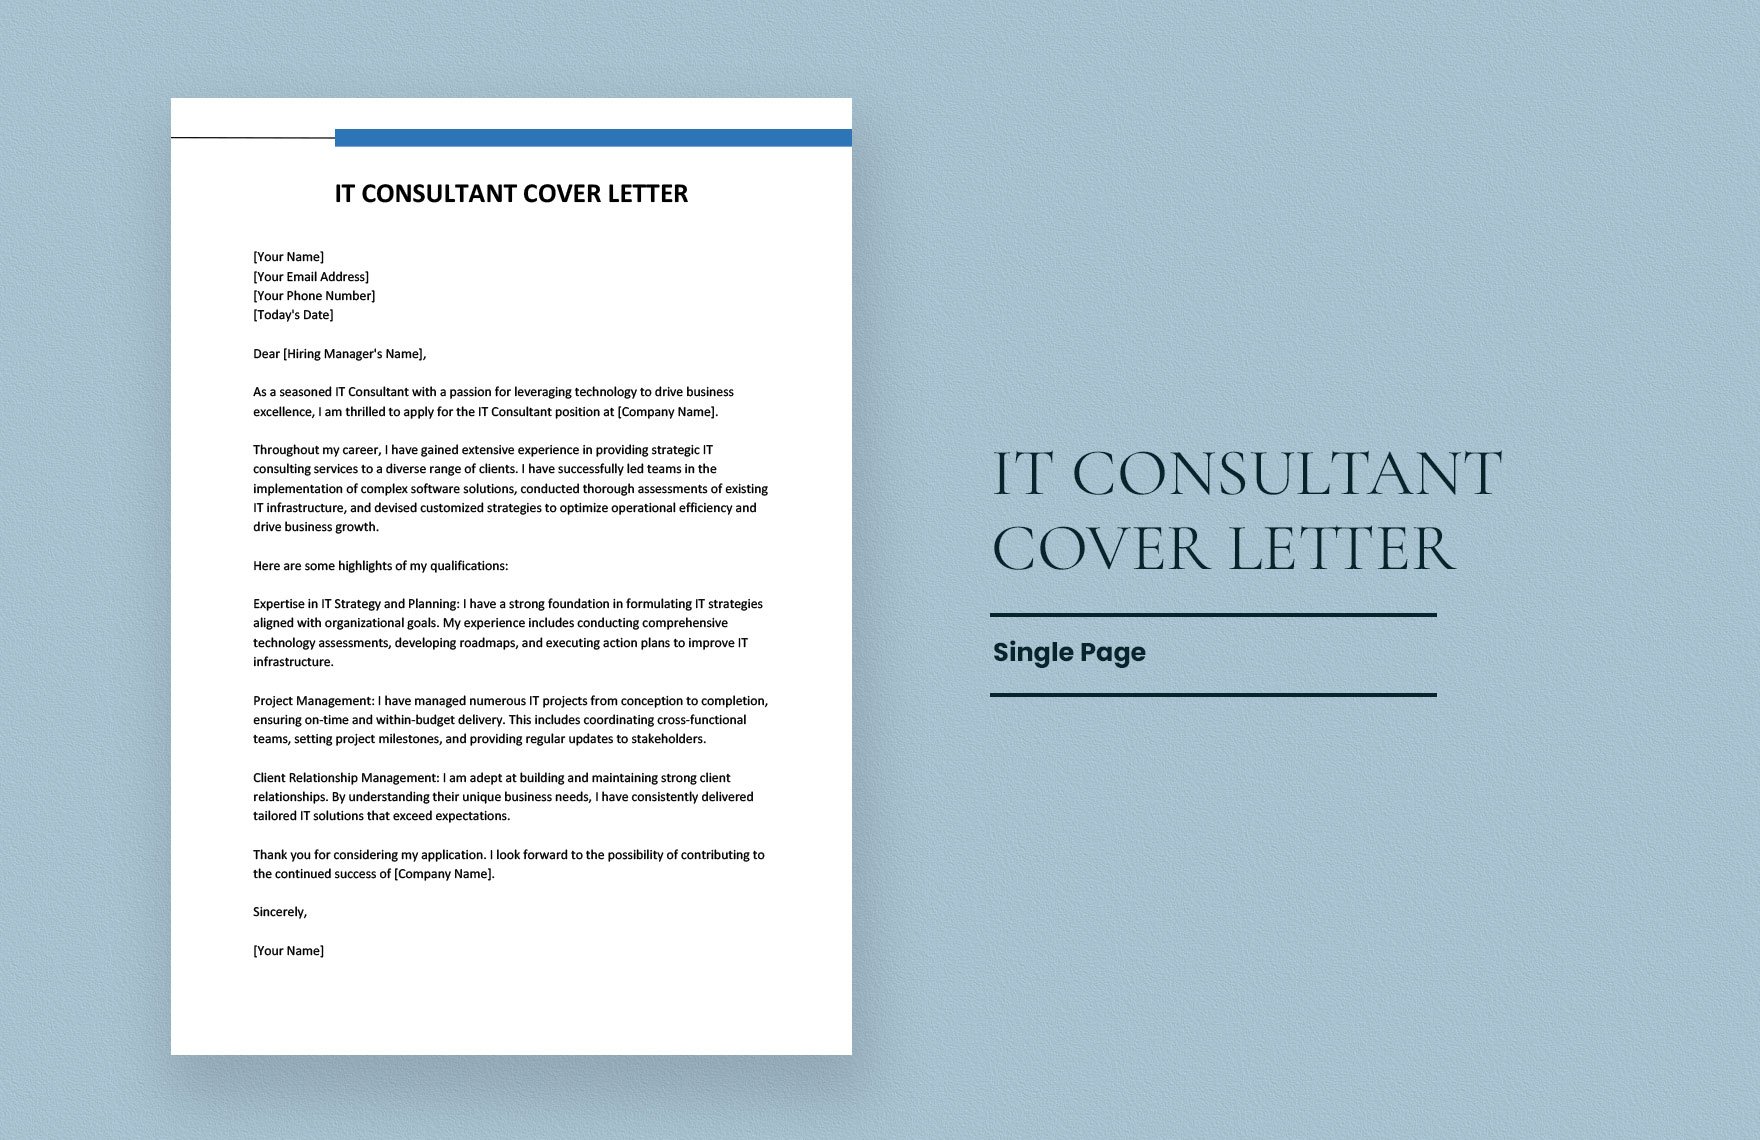 IT Consultant Cover Letter